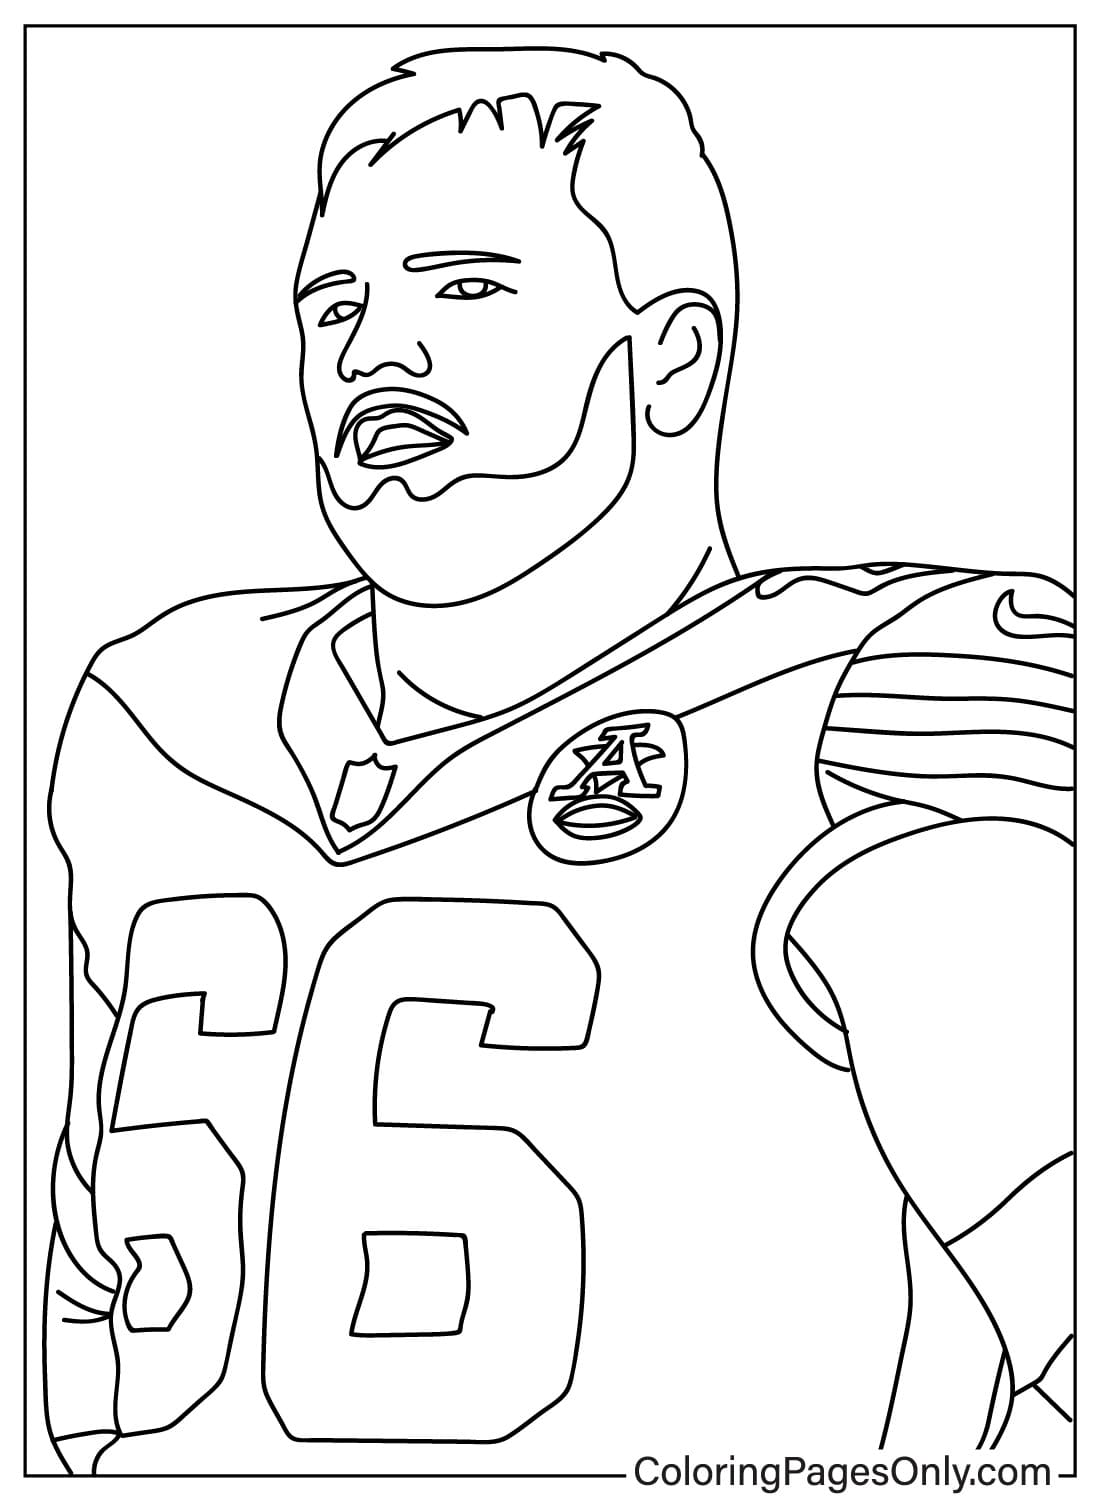 Mike Caliendo Coloring Page